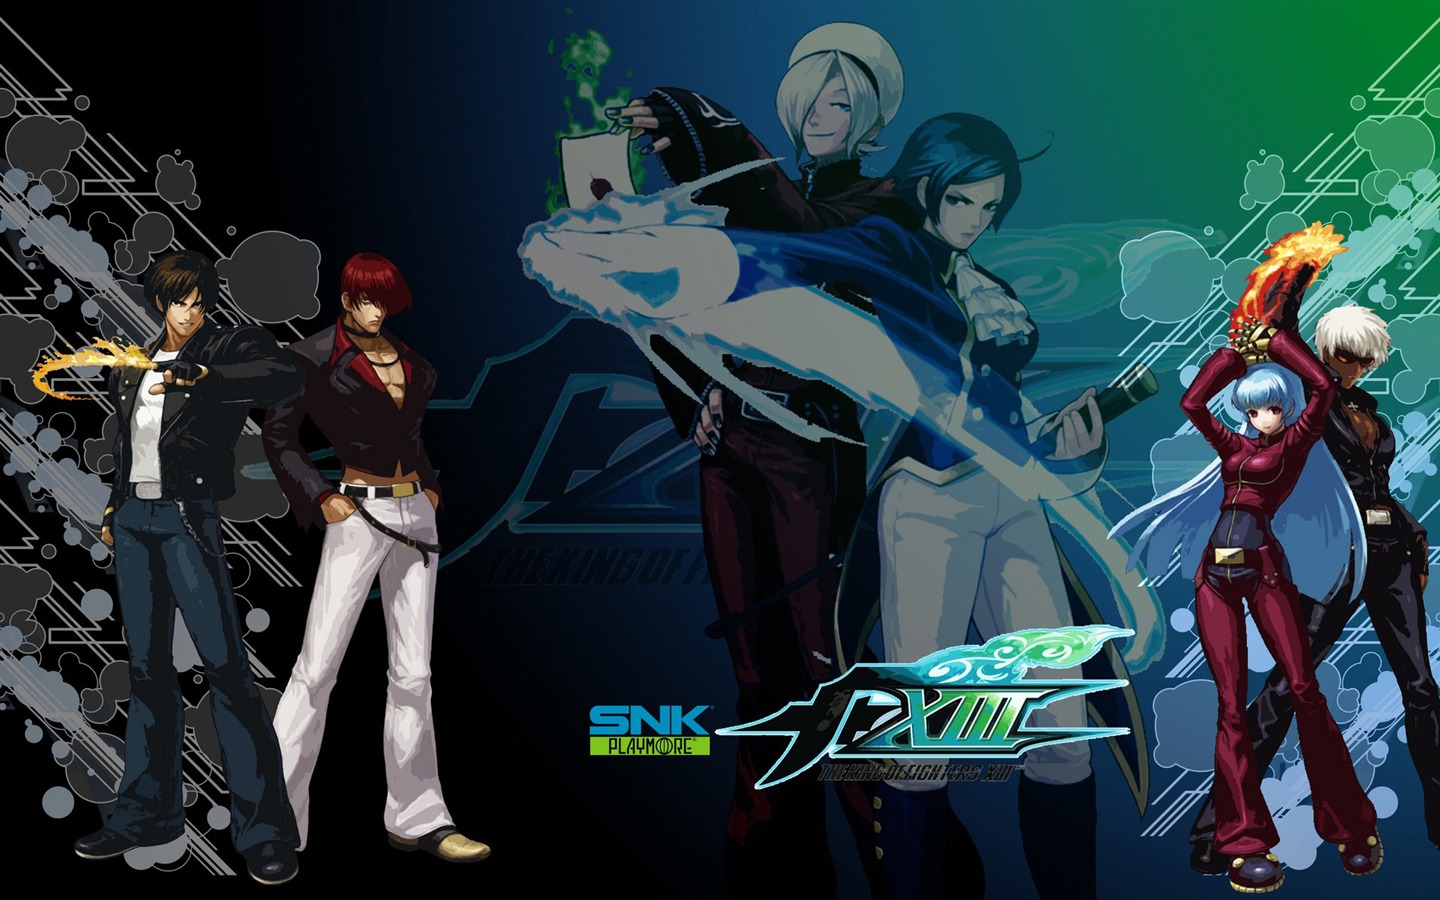 The King of Fighters XIII 拳皇13 壁纸专辑4 - 1440x900